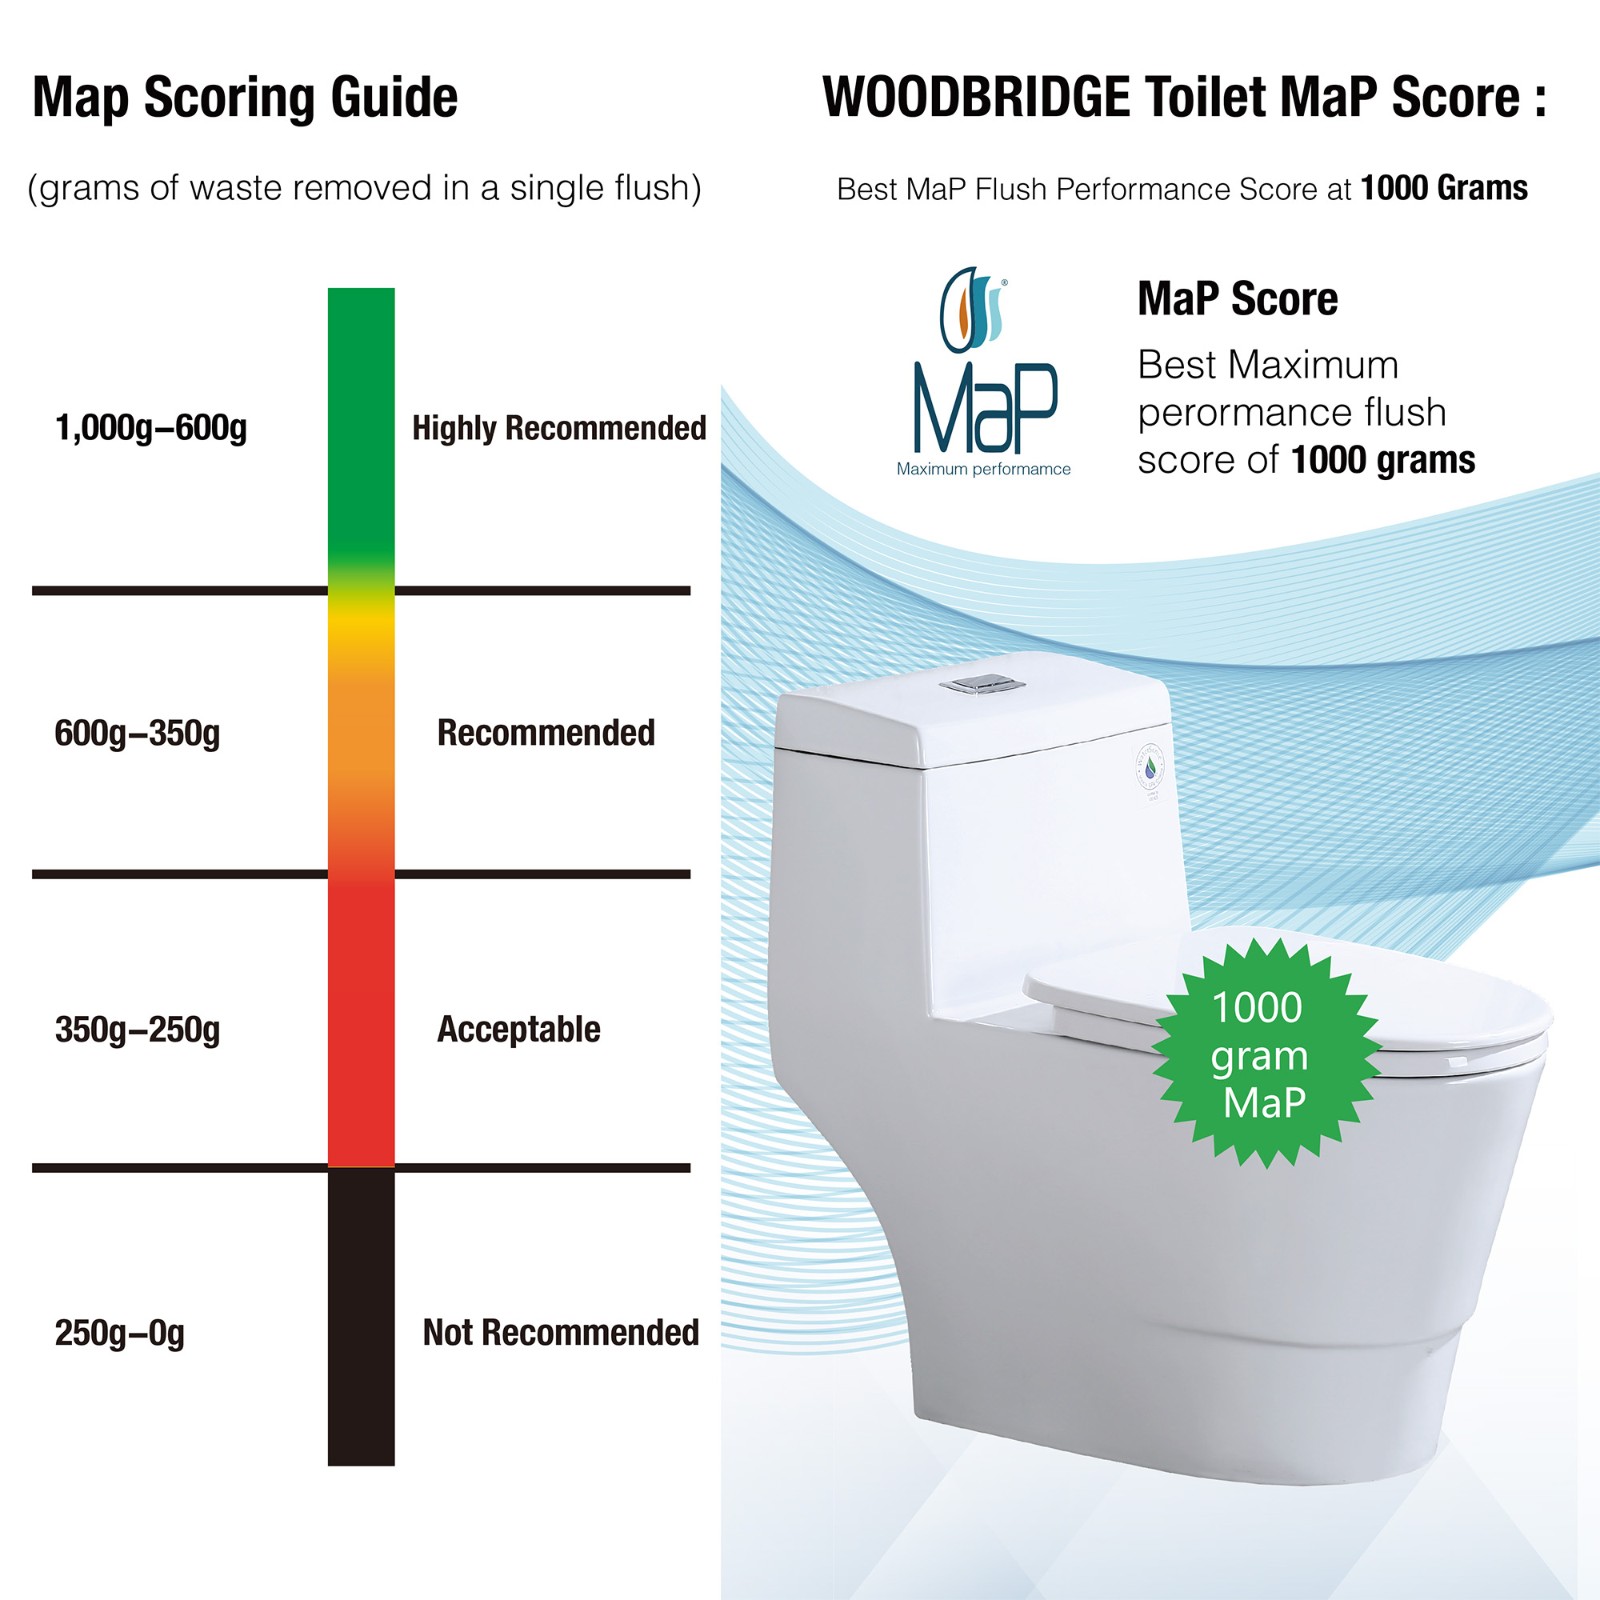  WOODBRIDGE B-0940-A Modern One-Piece Elongated toilet with Solf Closed Seat and Hand Free Touchless Sensor Flush Kit, White_5436